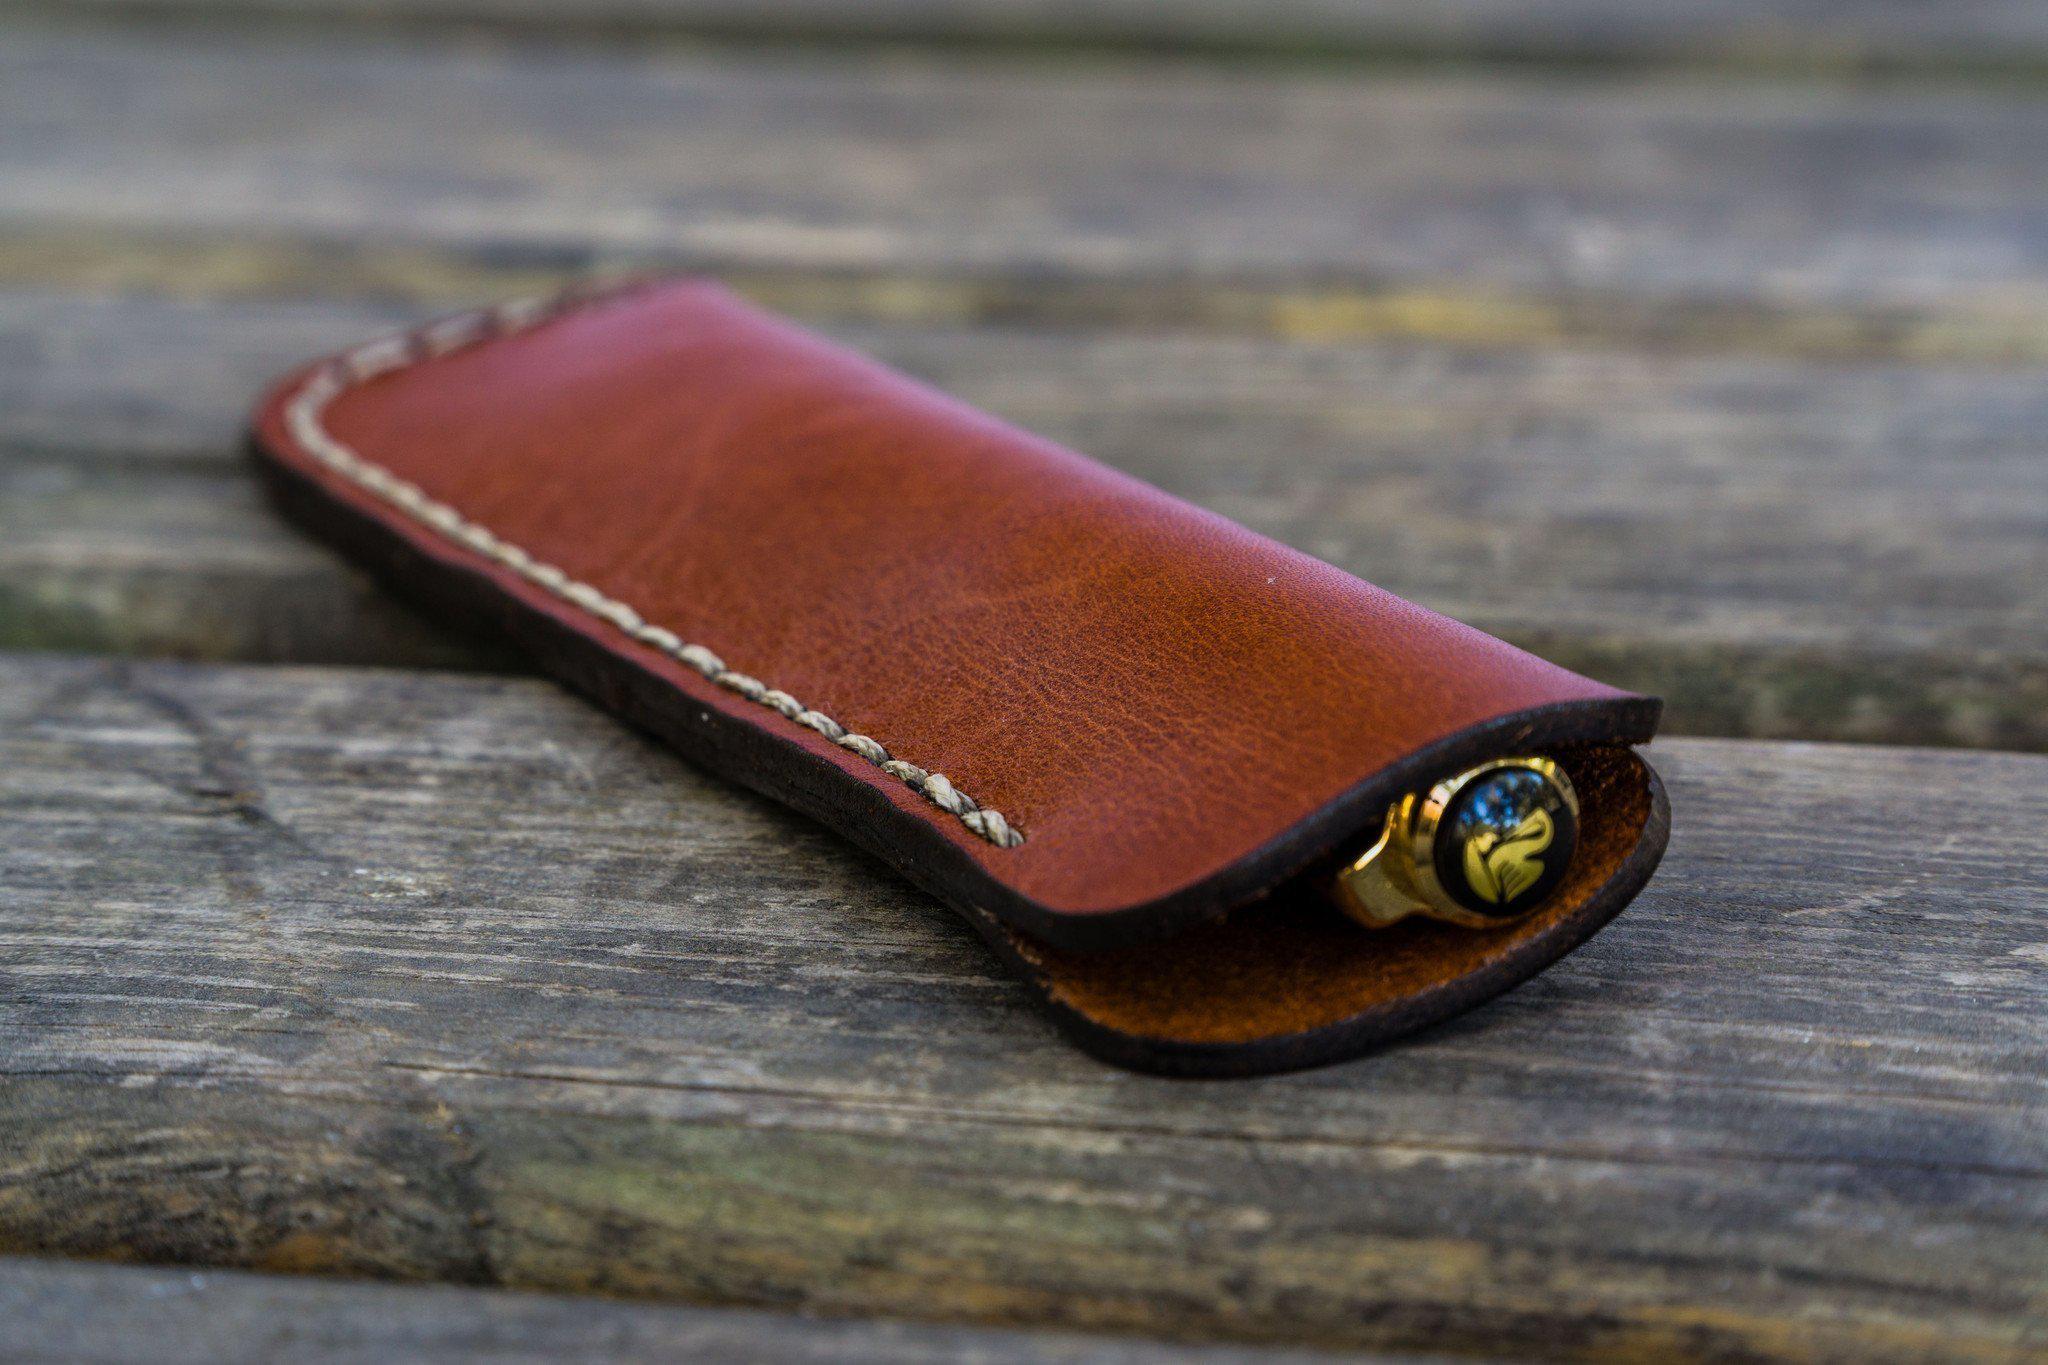 Leather Double Fountain Pen Case/Pen Sleeve - Natural - Galen Leather